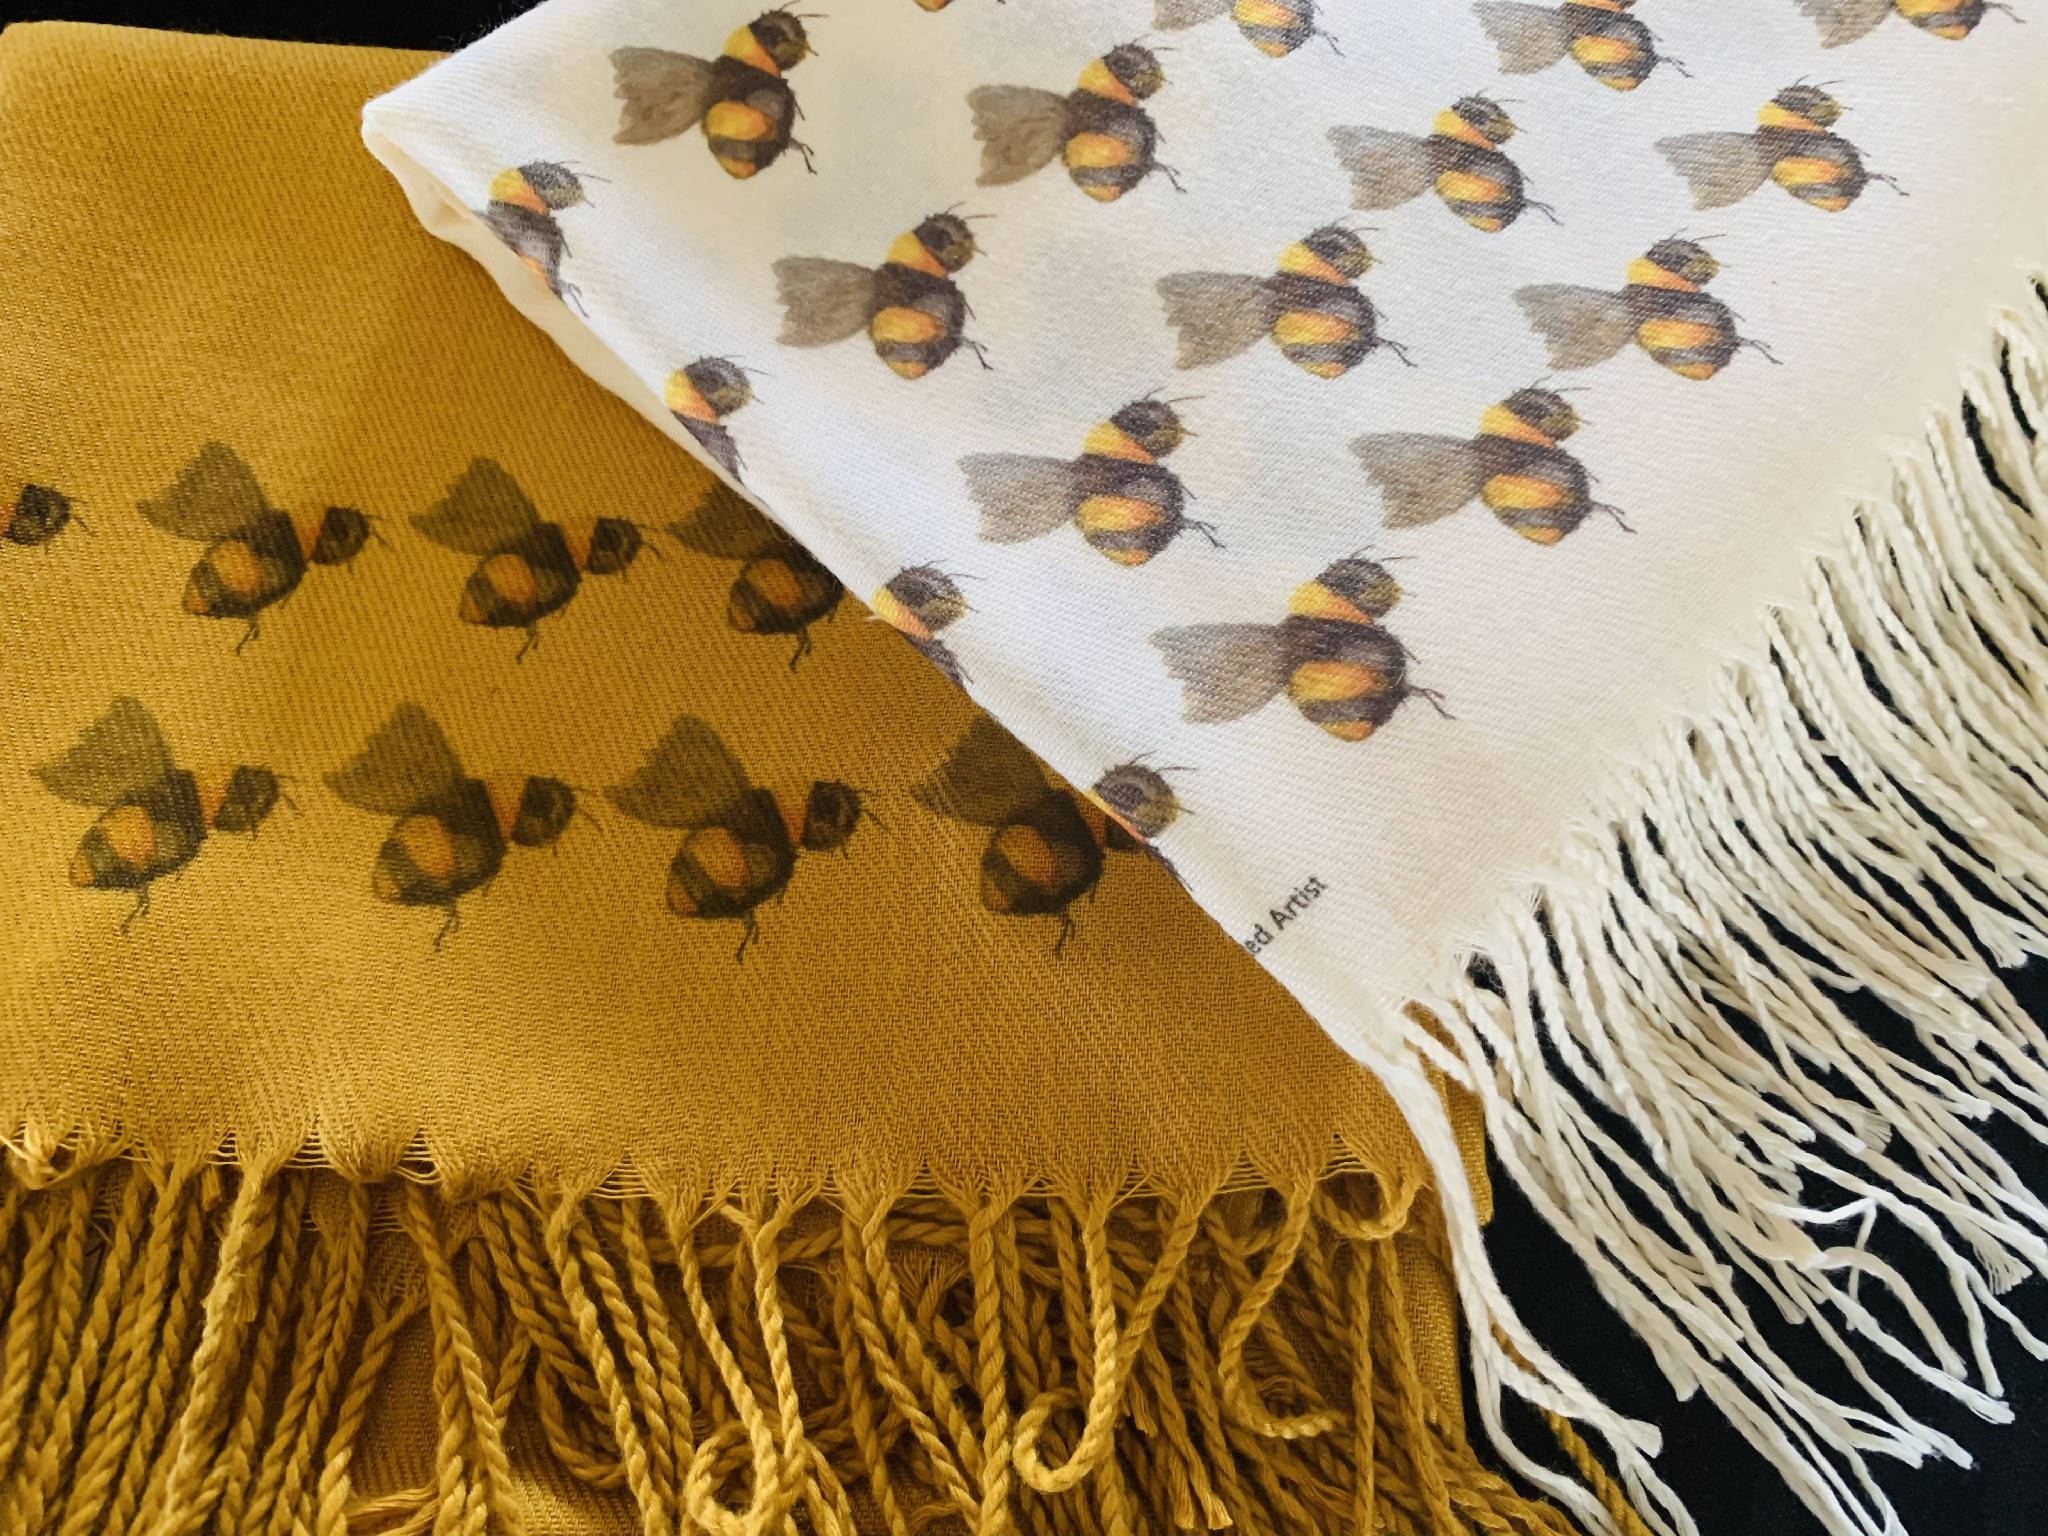 Bees Handprinted on a Cream Cashmere Blend Scarf